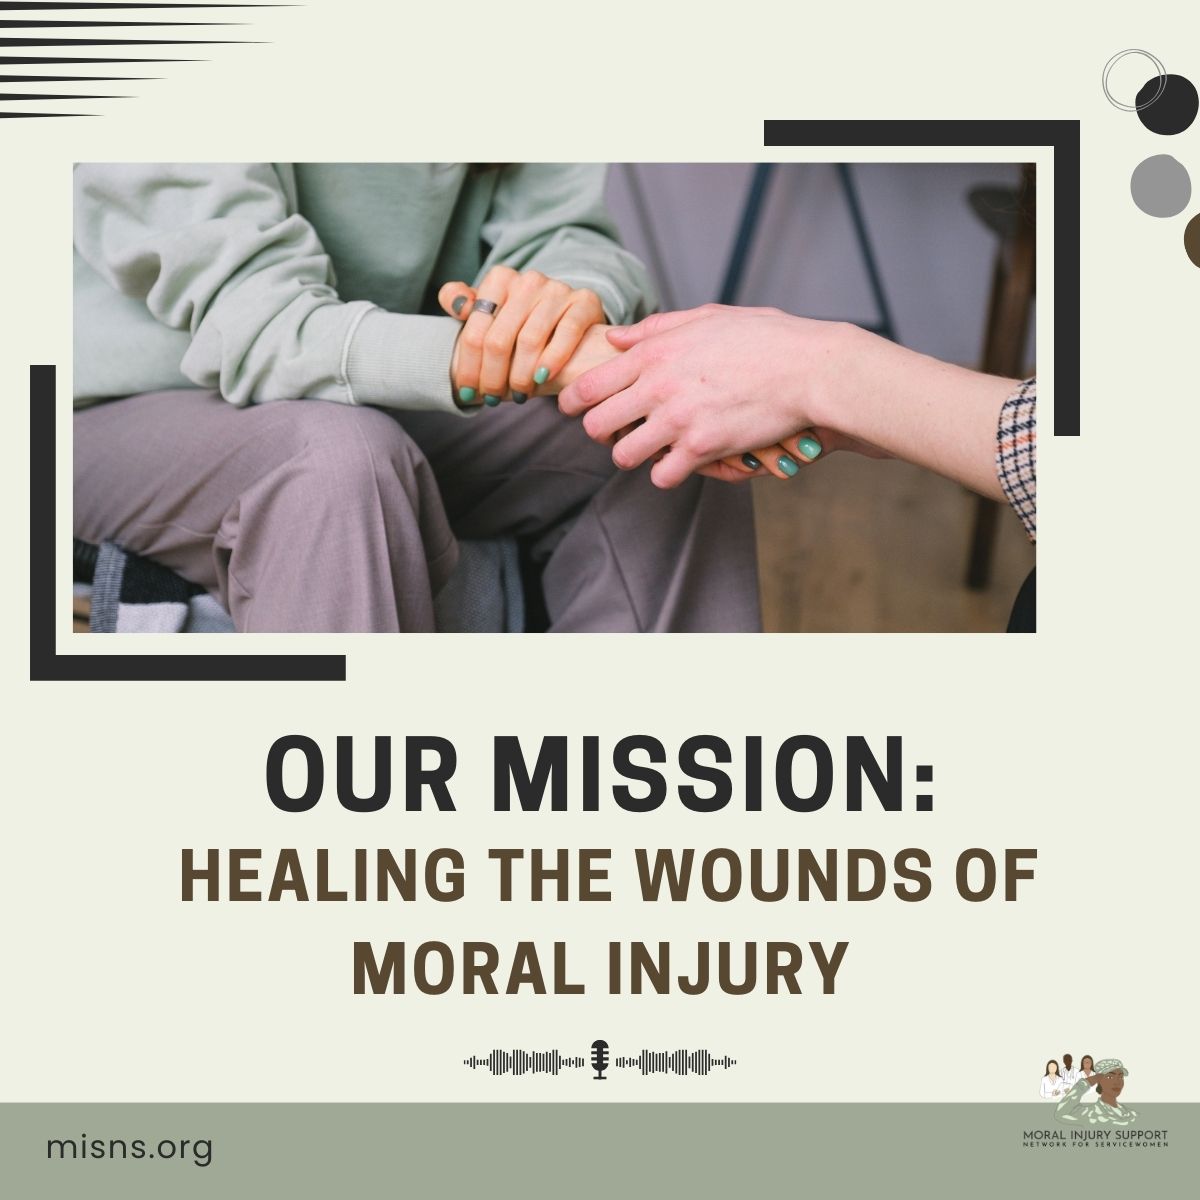 Join us in exploring the profound impact of moral injury in servicewomen, as discussed in this insightful podcast. 

youtube.com/watch?v=GBapcc…

#MoralInjury #Servicewomen #Veterans #Trauma #SupportOurTroops #MilitaryWomen
#PTSDAwareness #WomenInService #MentalHealth #Empowerment